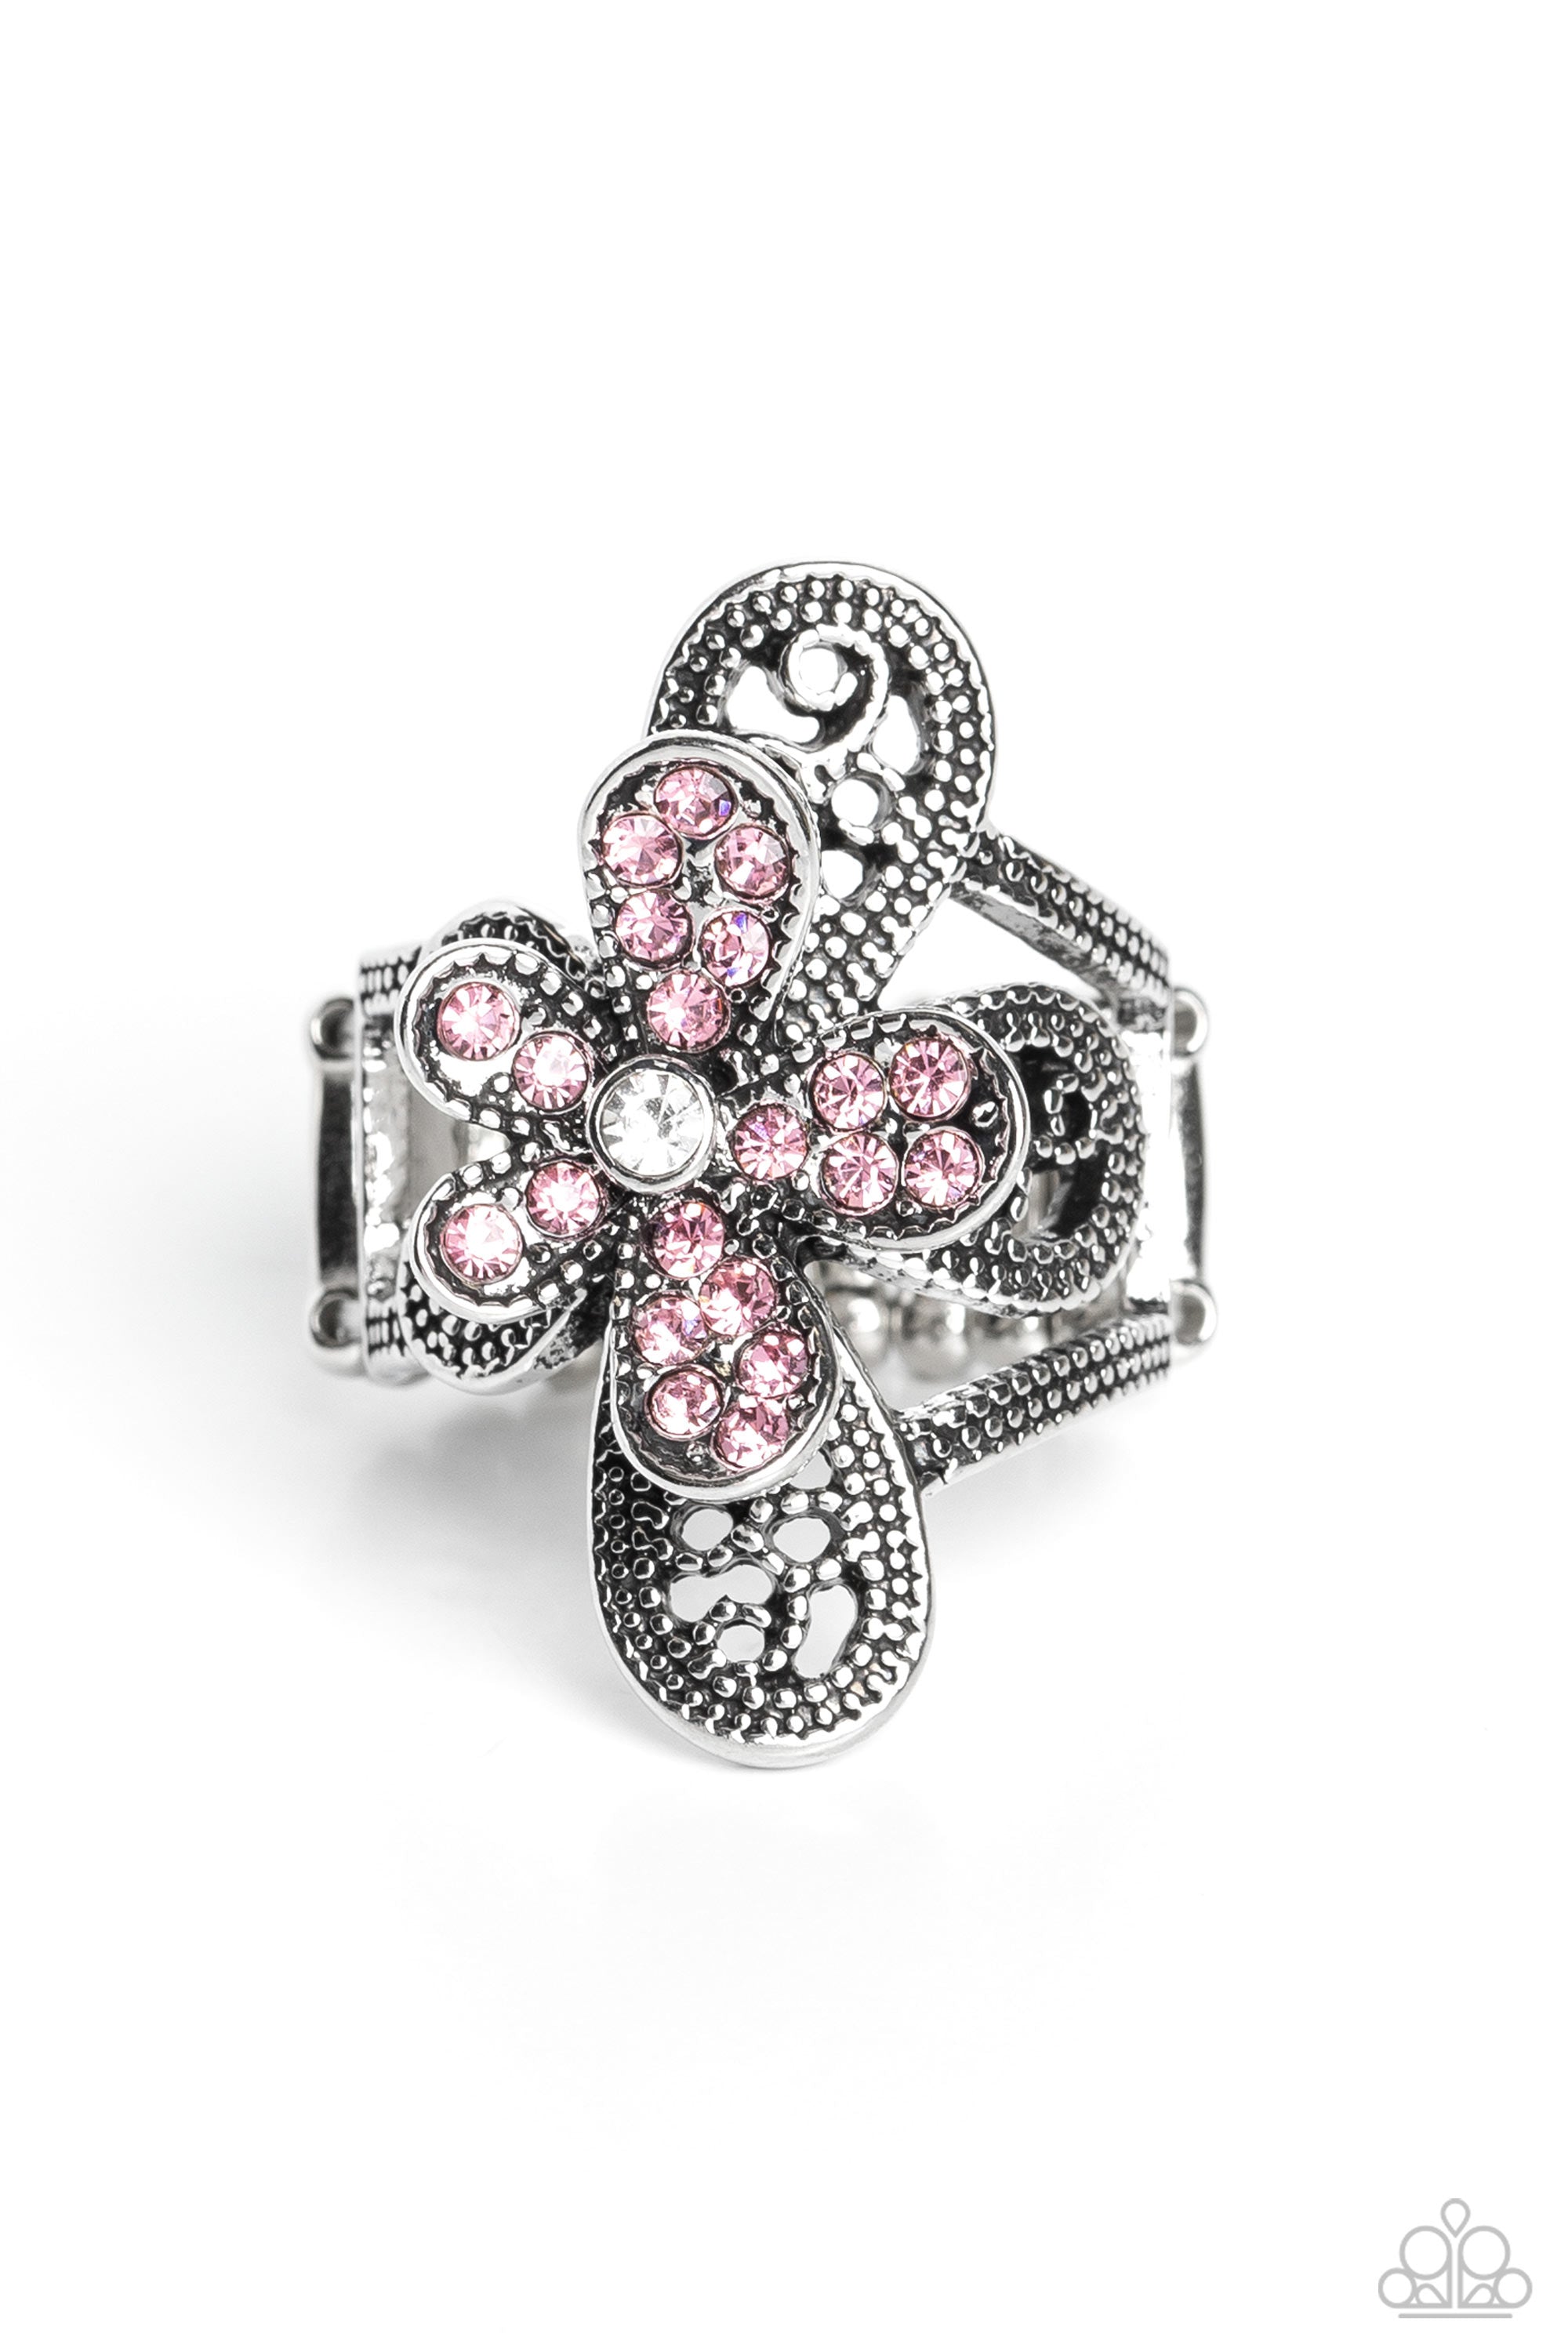 Garden Escapade Pink Flower Ring - Paparazzi Accessories- lightbox - CarasShop.com - $5 Jewelry by Cara Jewels